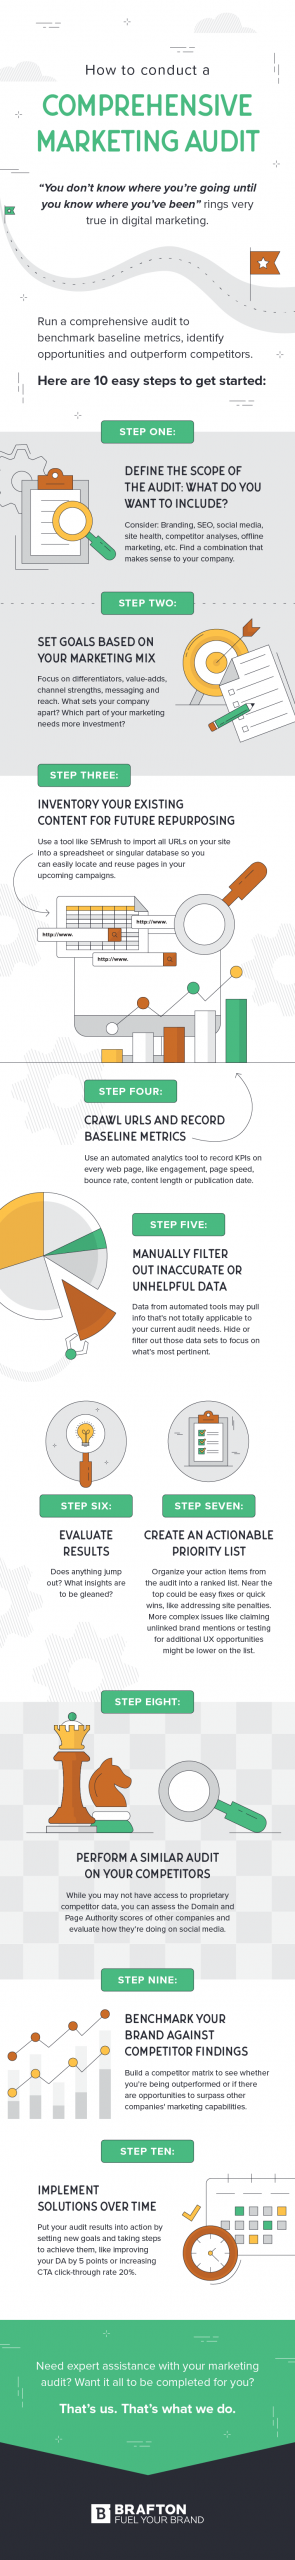 Infographic: How to conduct a comprehensive marketing audit